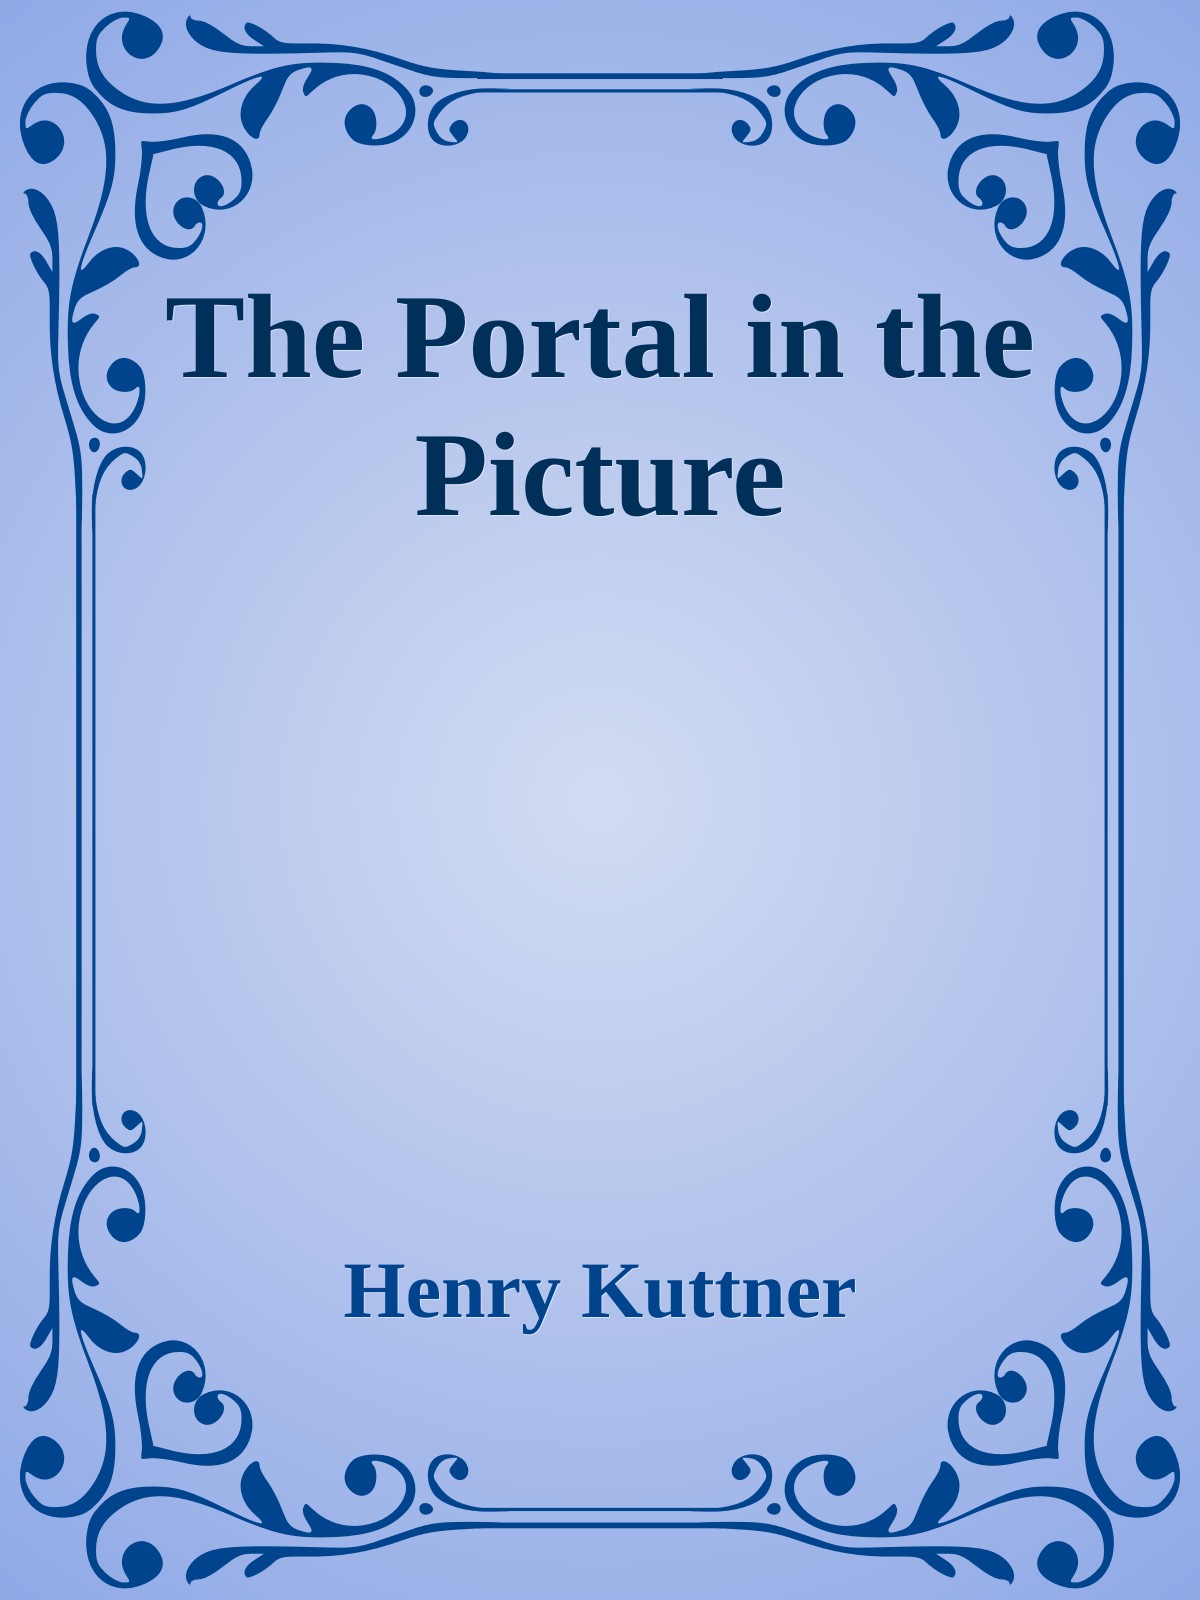 The Portal in the Picture